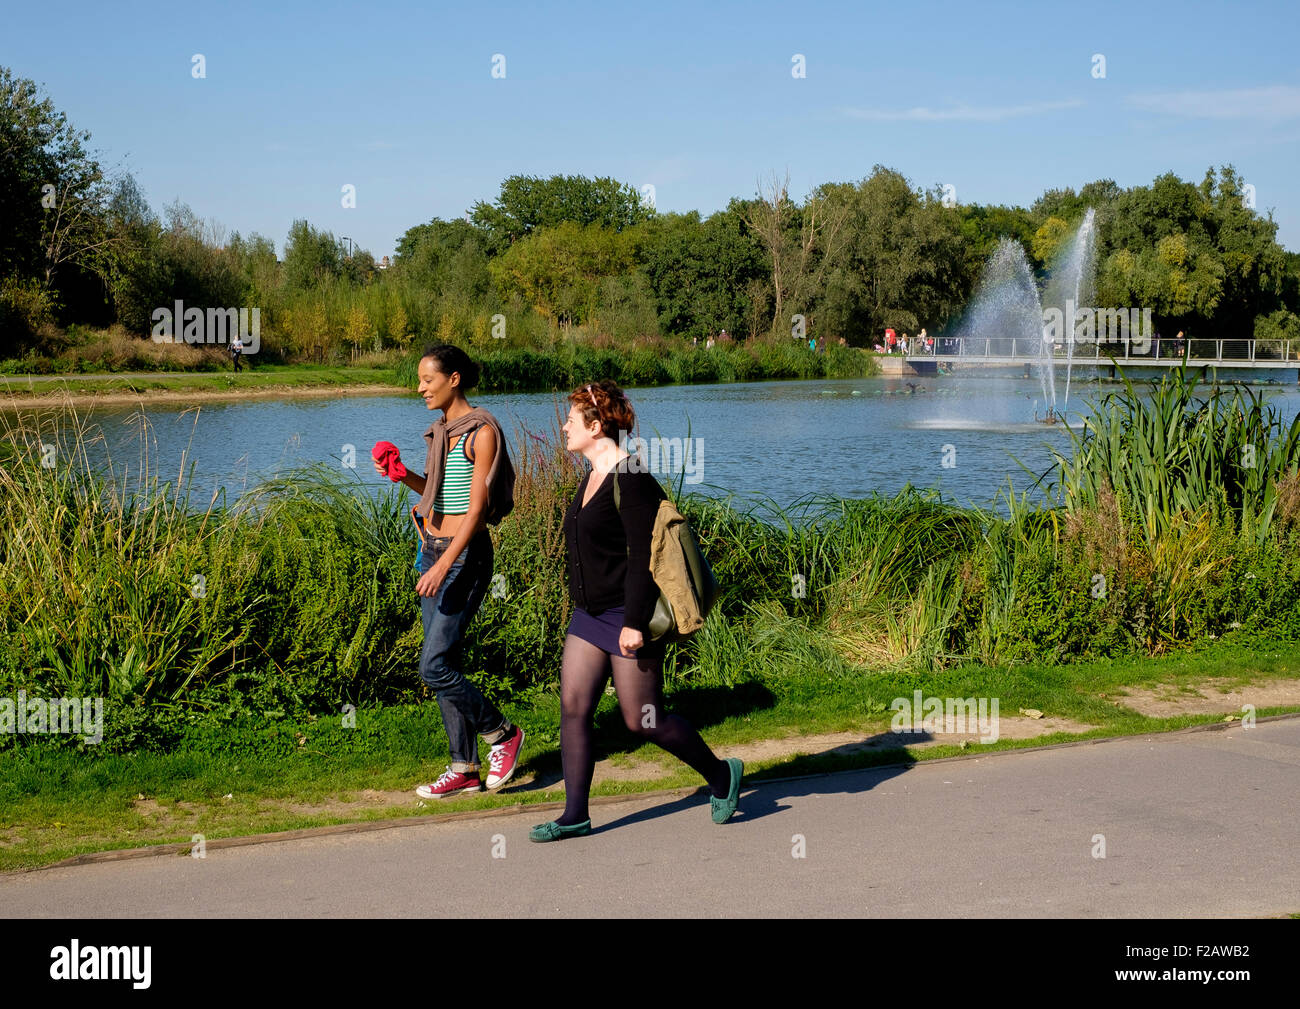 10 September 2015: Walworth, South London: Two women on a afternoon walk by the lake, Burgess Park Stock Photo